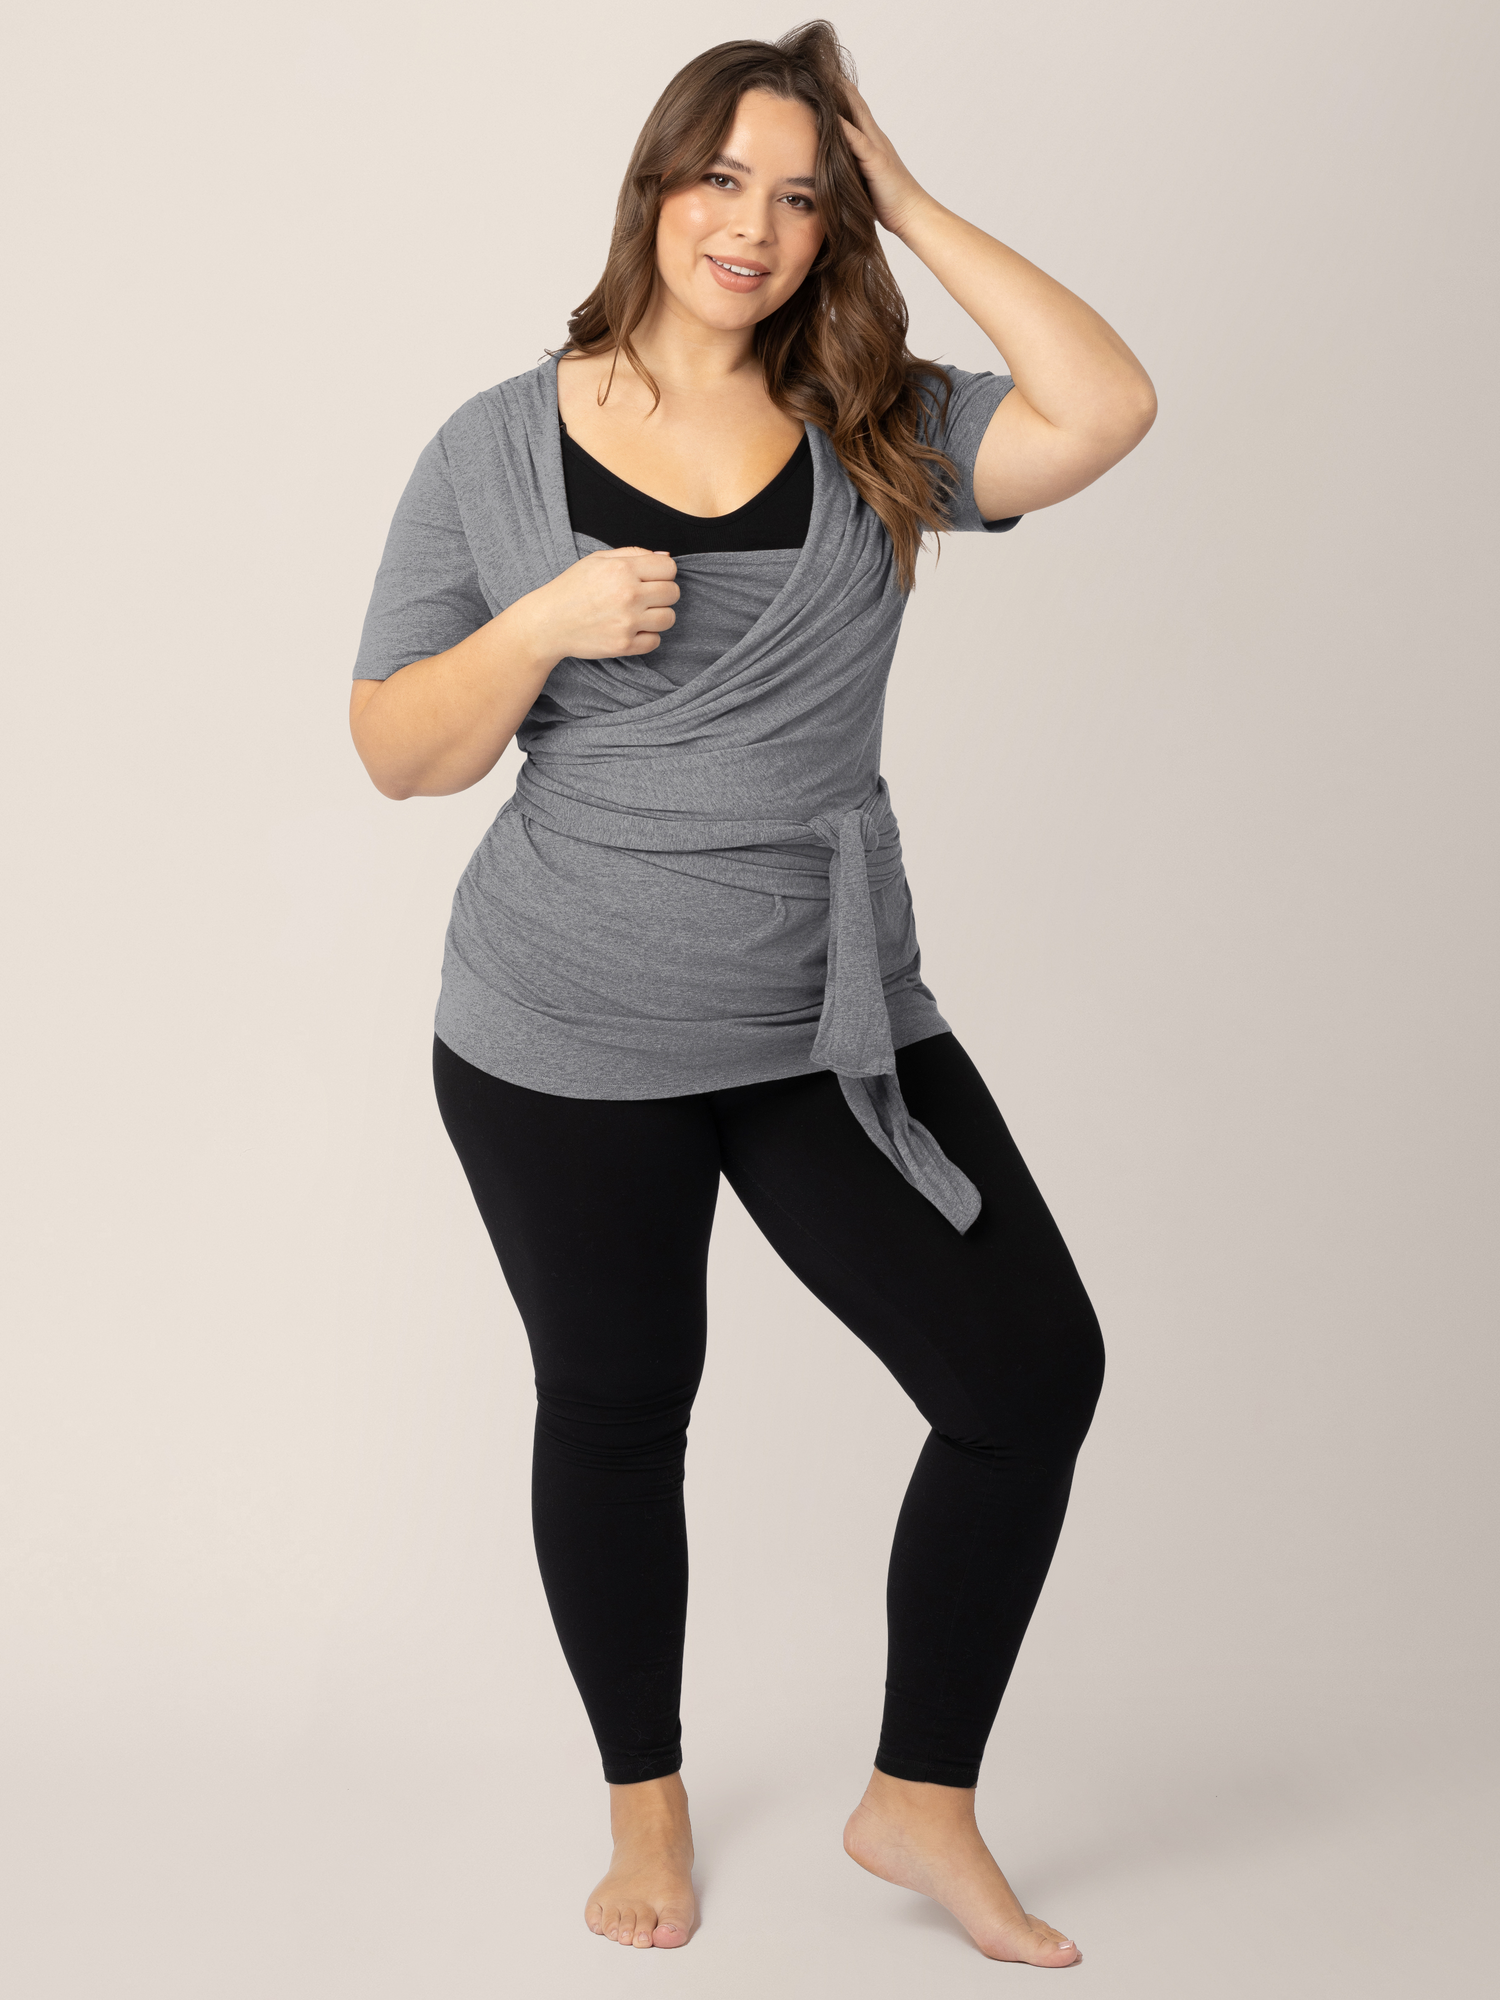 Model wearing the Organic Cotton Skin to Skin Wrap Top in Charcoal Grey Heather showing the easy pull down wrap neck.